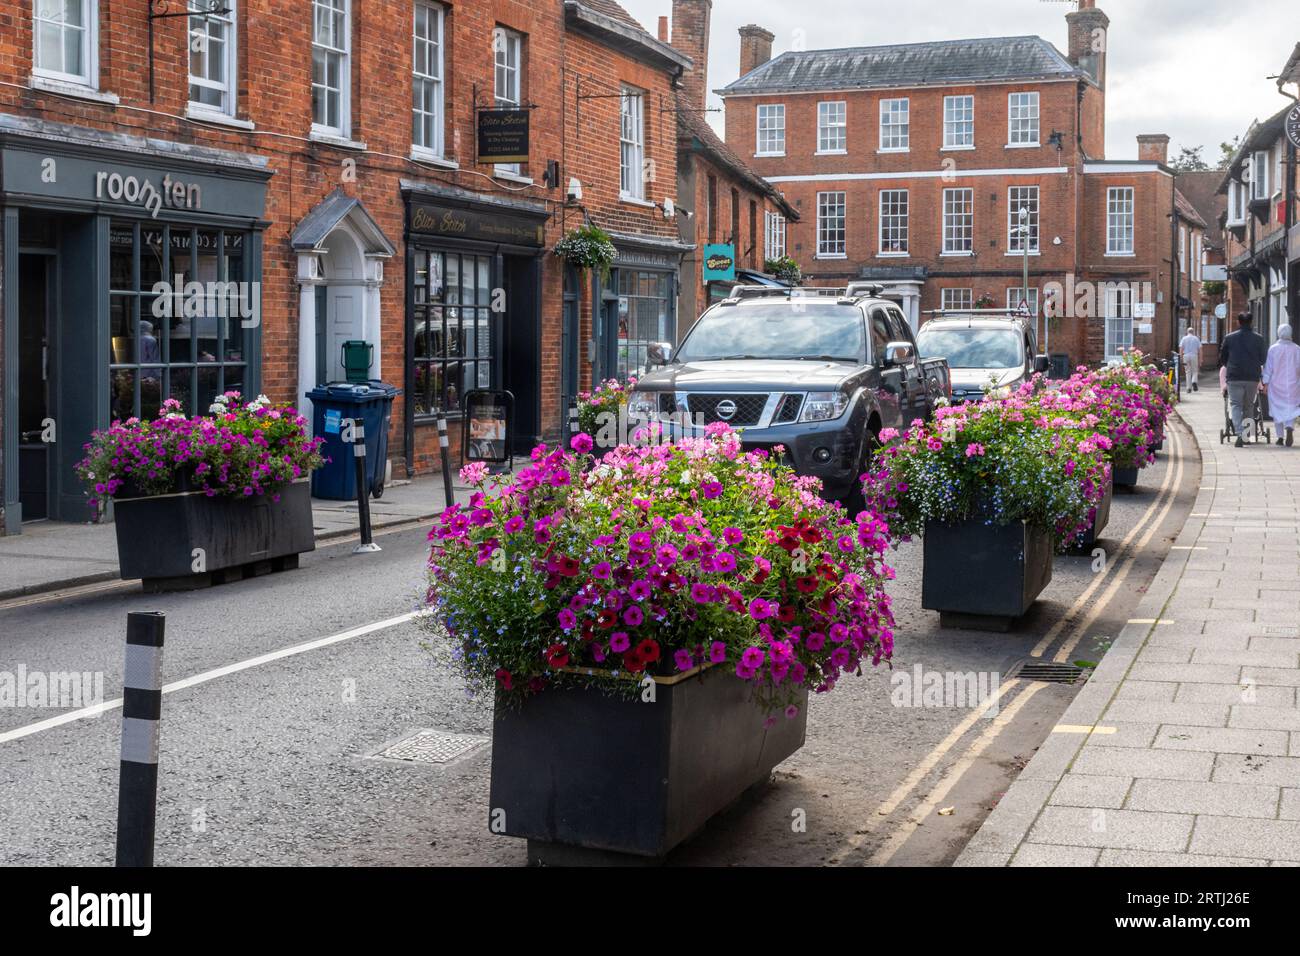 Traffic calming scheme, planters filled with flowers placed in the road to narrow it and slow traffic, Farnham town centre, Surrey, England, UK Stock Photo